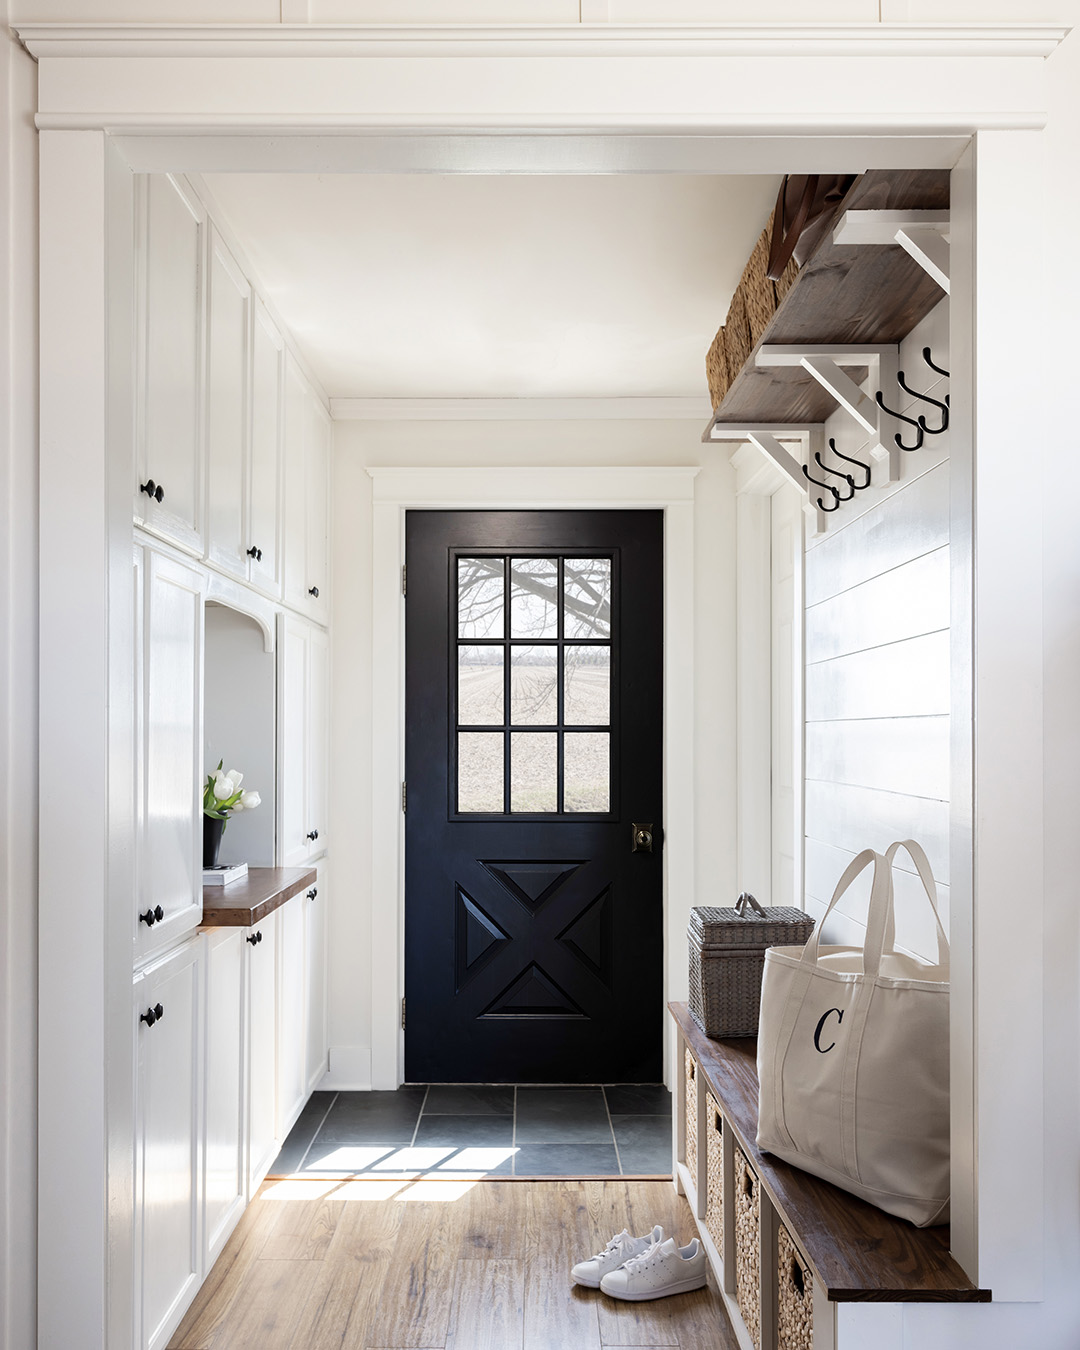 Sharing another one of our home's mudrooms and entryways today! This one is located in the back of our house and is used as kind of a "Mom's mudroom". Here's a look at our current back hall mudroom!